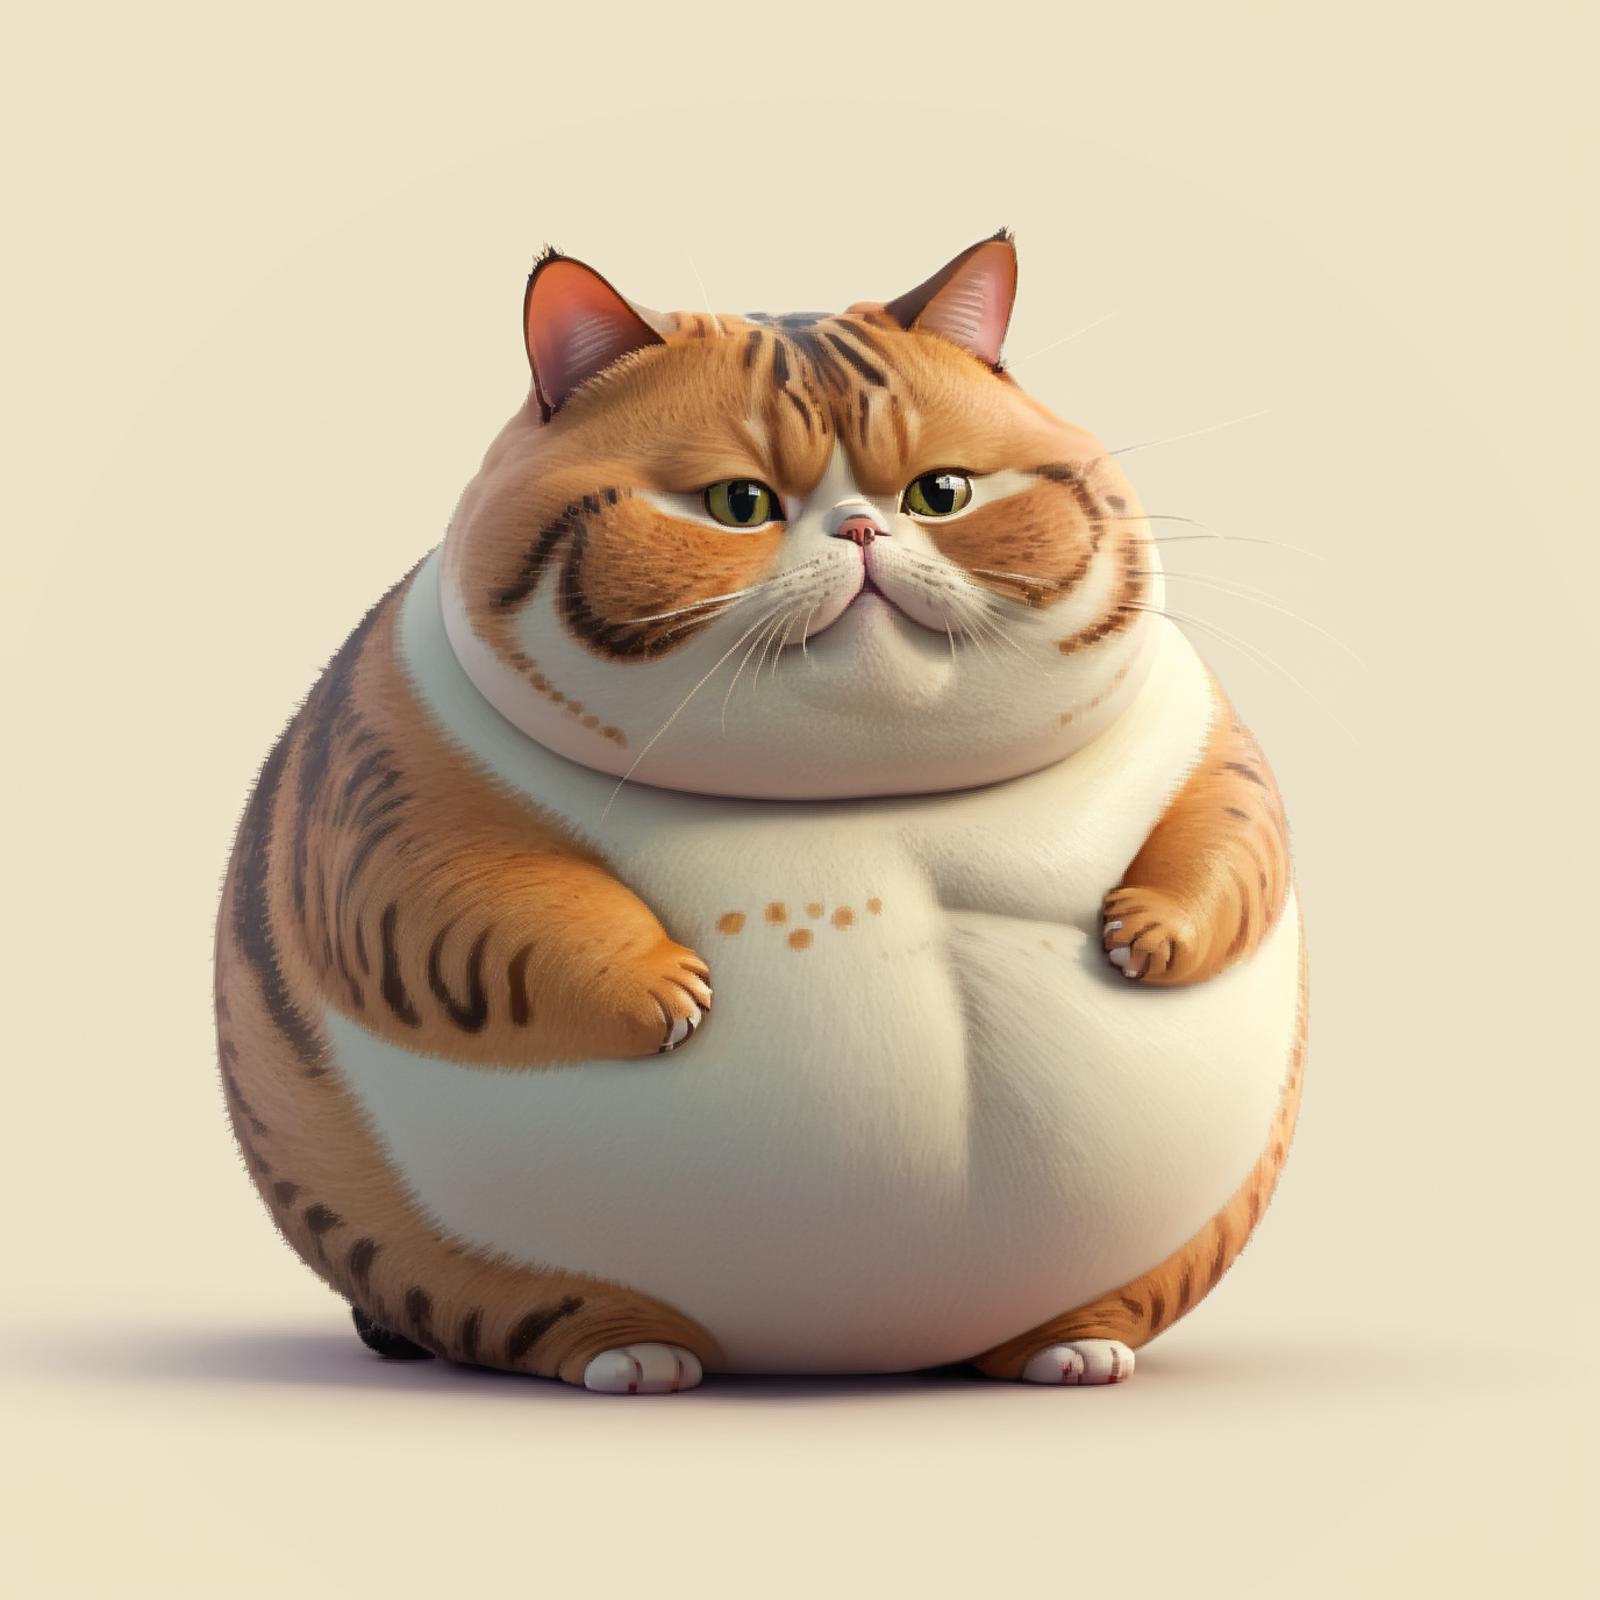 A cartoon cat with a white belly standing on the floor.